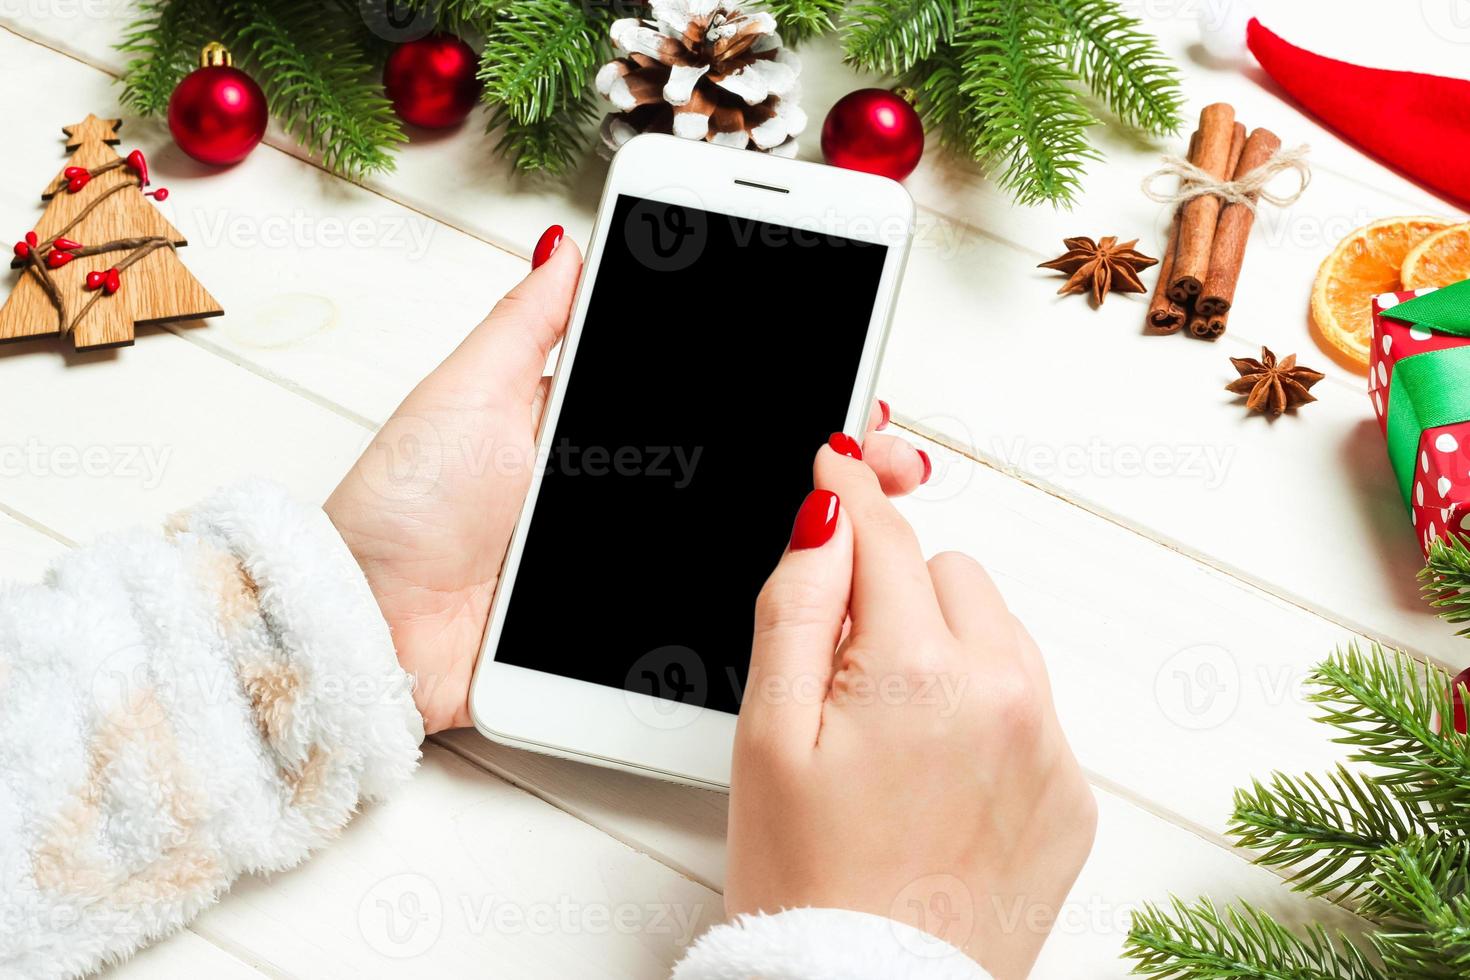 Top view of a woman holding a phone in her hand on wooden New Year background made of fir tree and festive decorations. Christmas holiday concept. Mockup photo